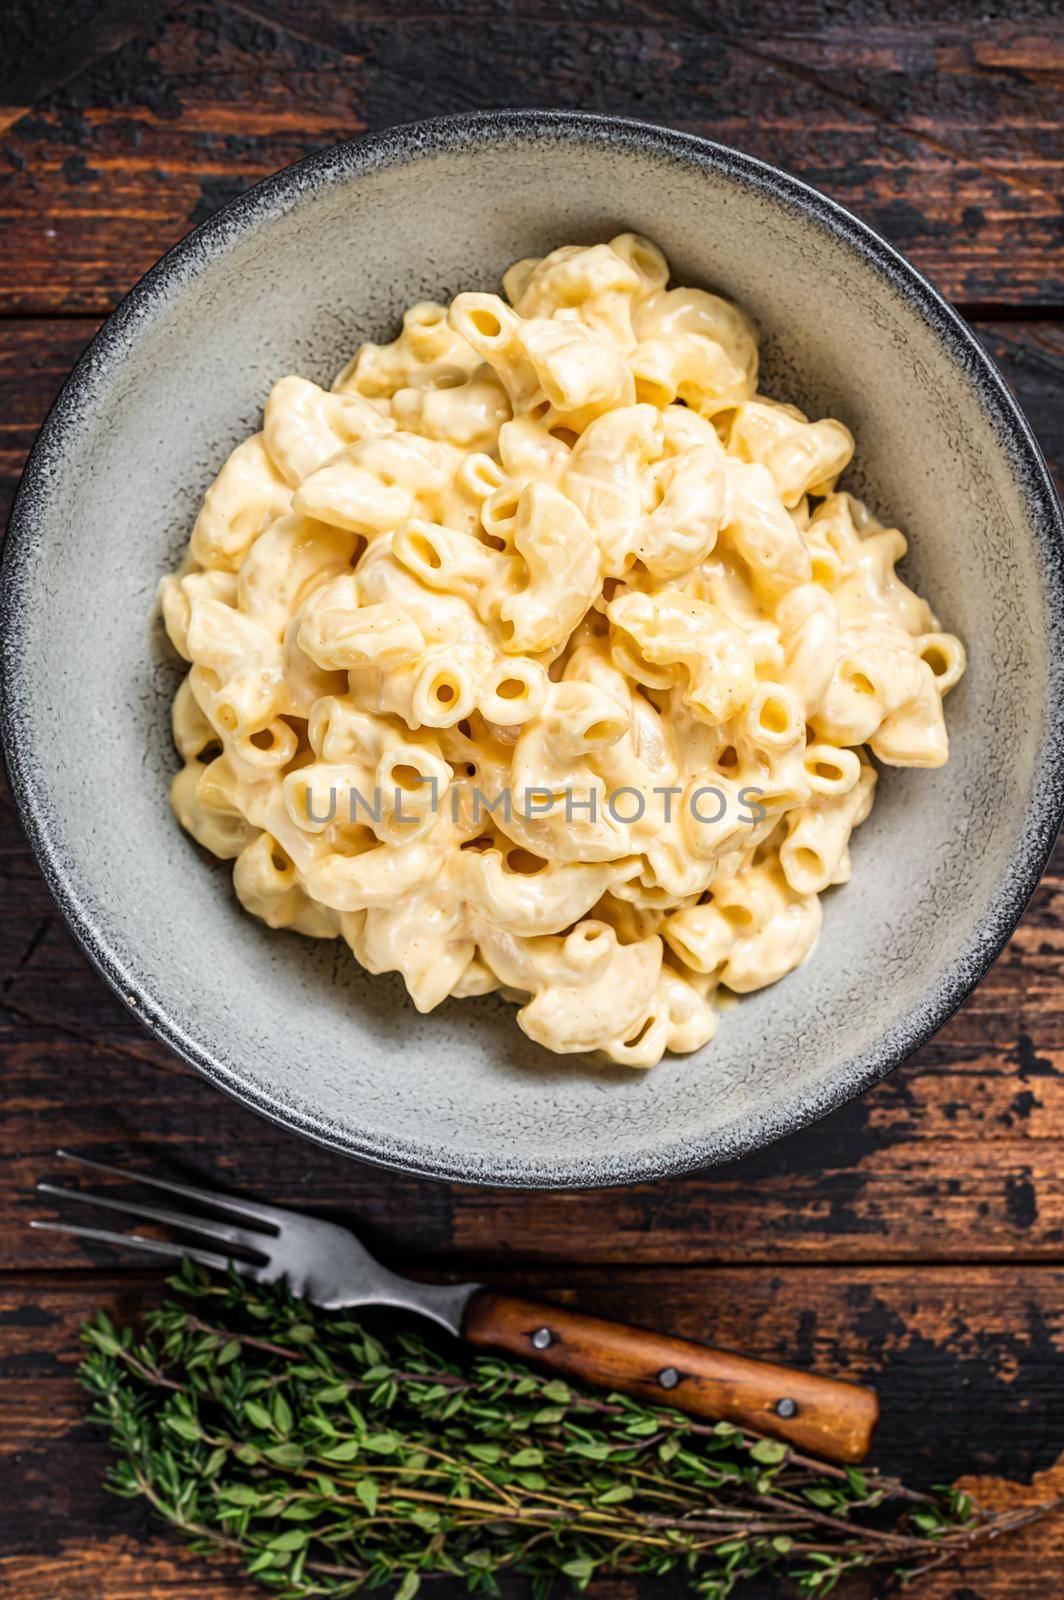 American dish Mac and cheese macaroni pasta with Cheddar. Dark wooden background. Top view by Composter